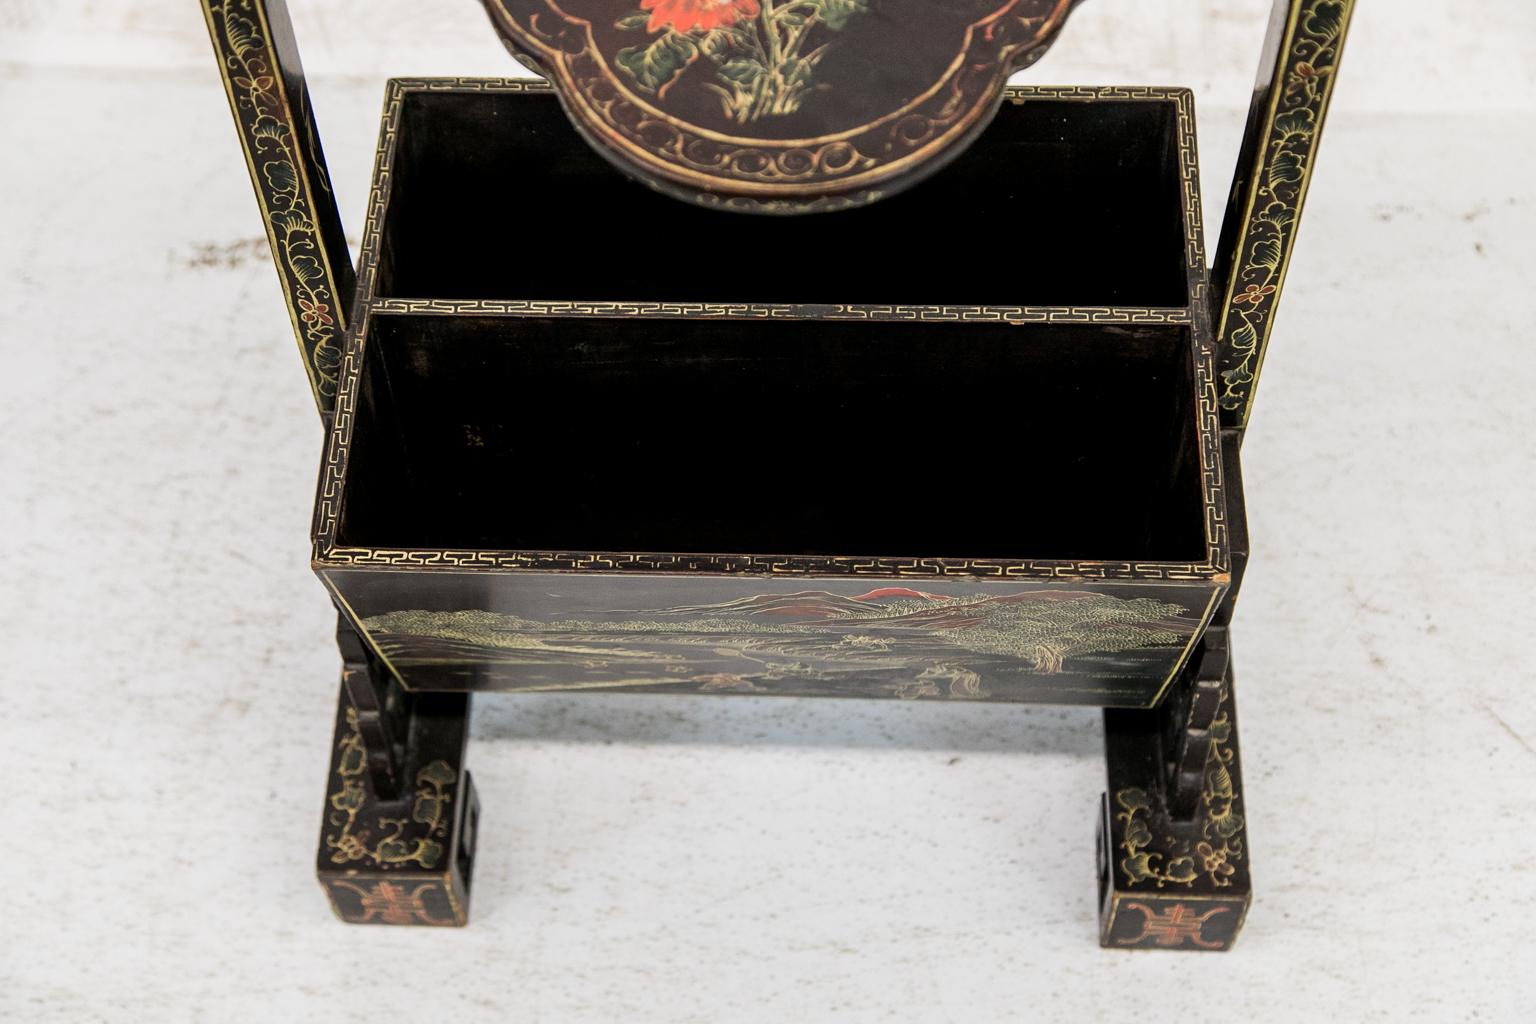 This rack is decorated with green and red floral, vine, and geometric motifs with gold highlights throughout. The side supports have carved geometric double brackets on each side which rest on geometric scrolled feet.